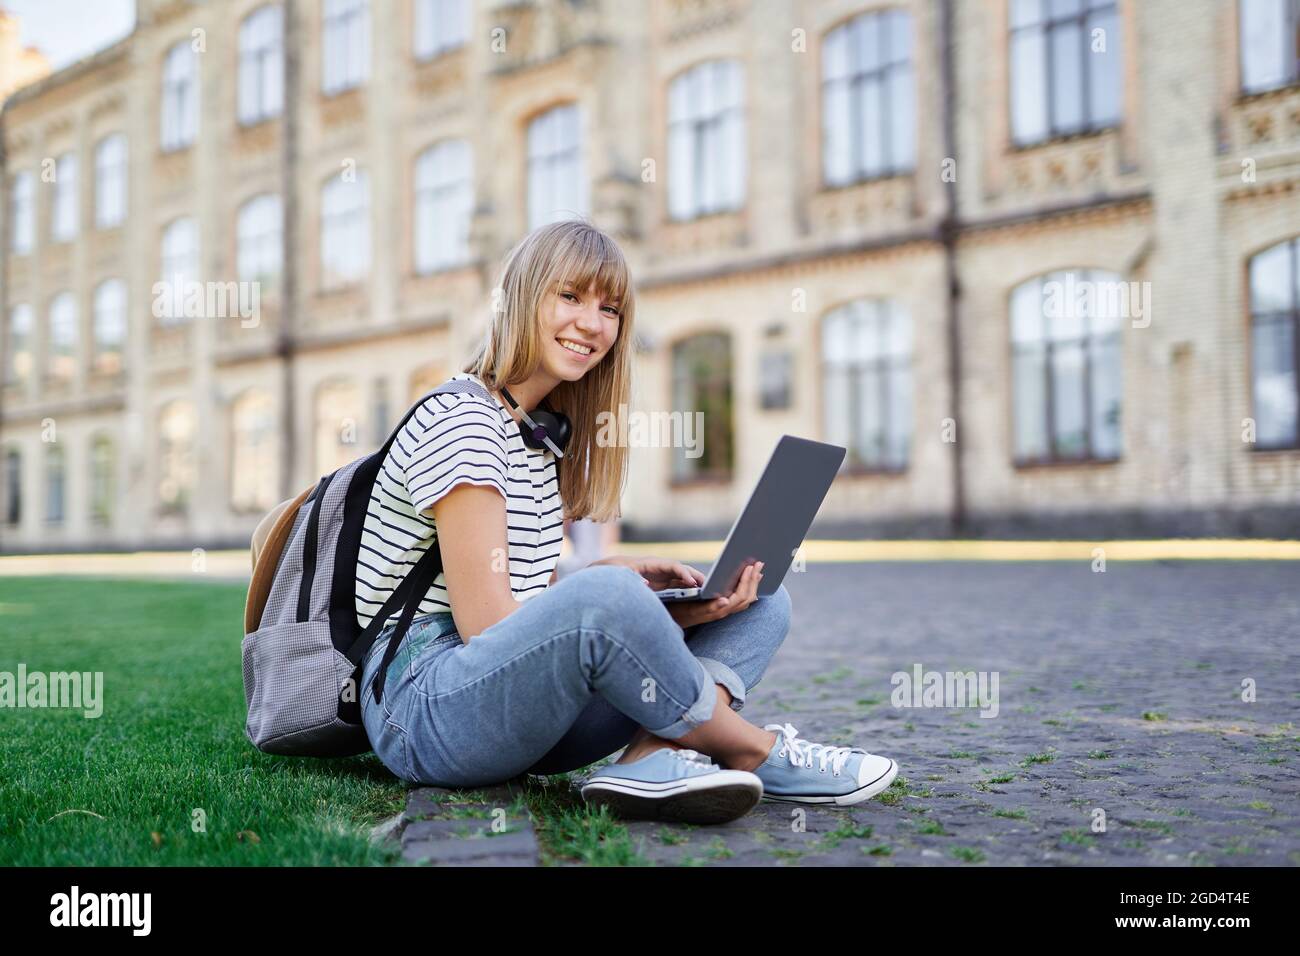 Young cute caucasian blonde female student at university campus sitting on green grass with backpack and laptop browsing internet happy emotion looking straight at camera. High quality photo Stock Photo